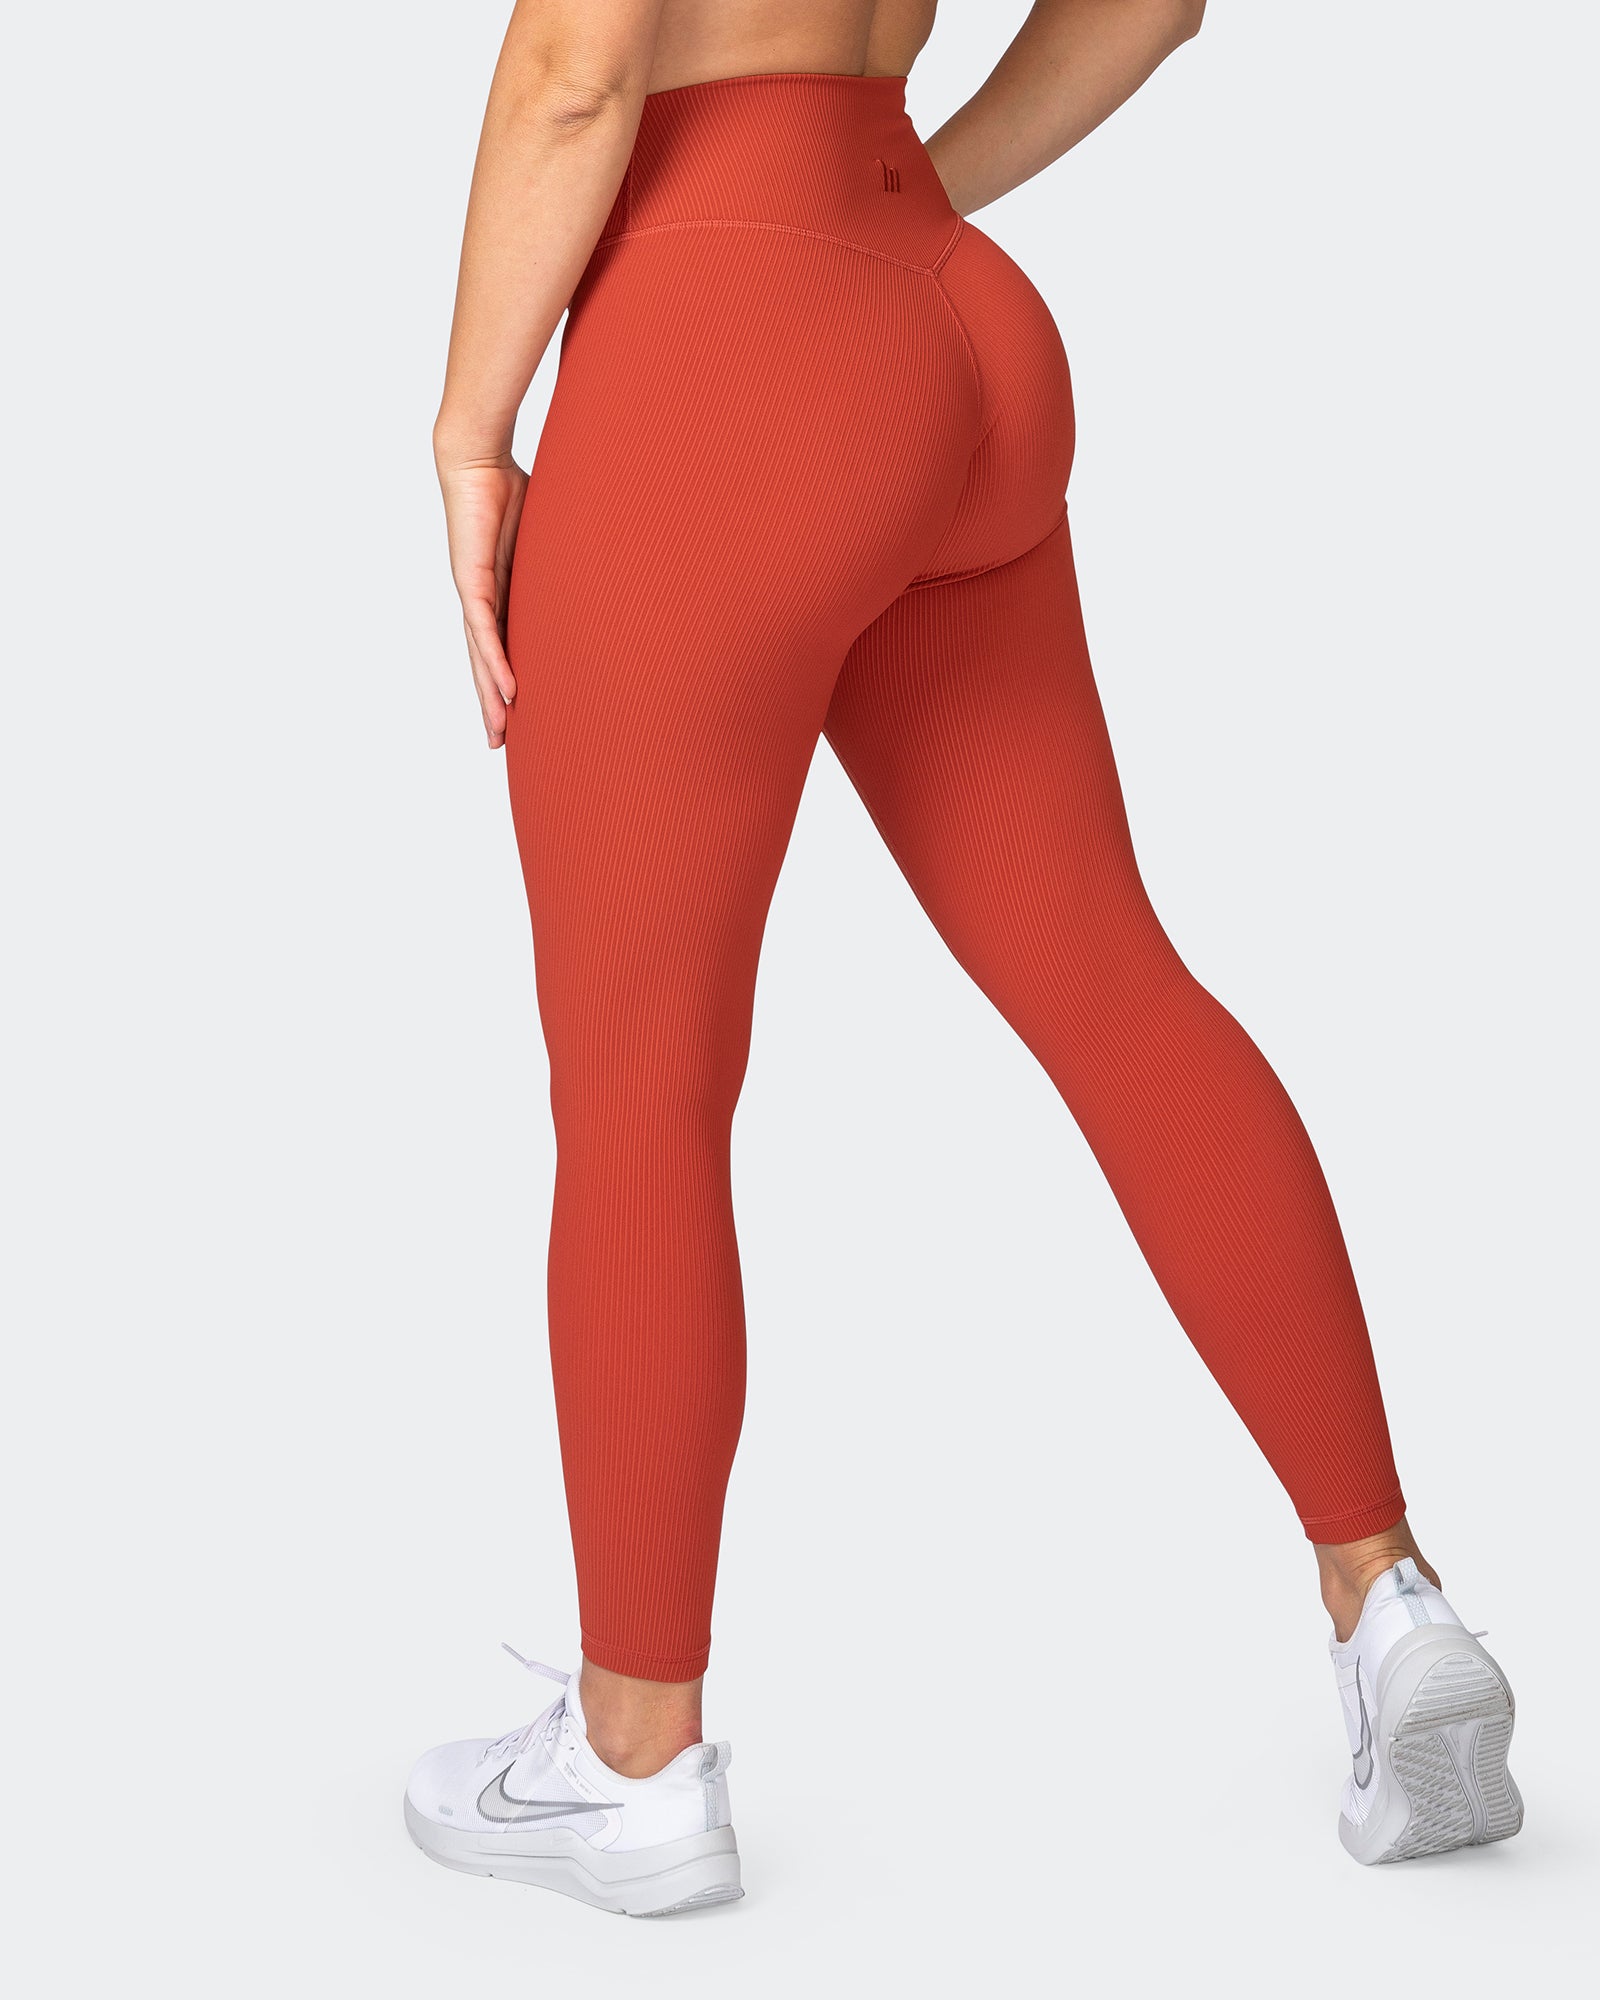 Buy Lux Lyra Ankle Length Legging L17 Orange Free Size Online at Low Prices  in India at Bigdeals24x7.com